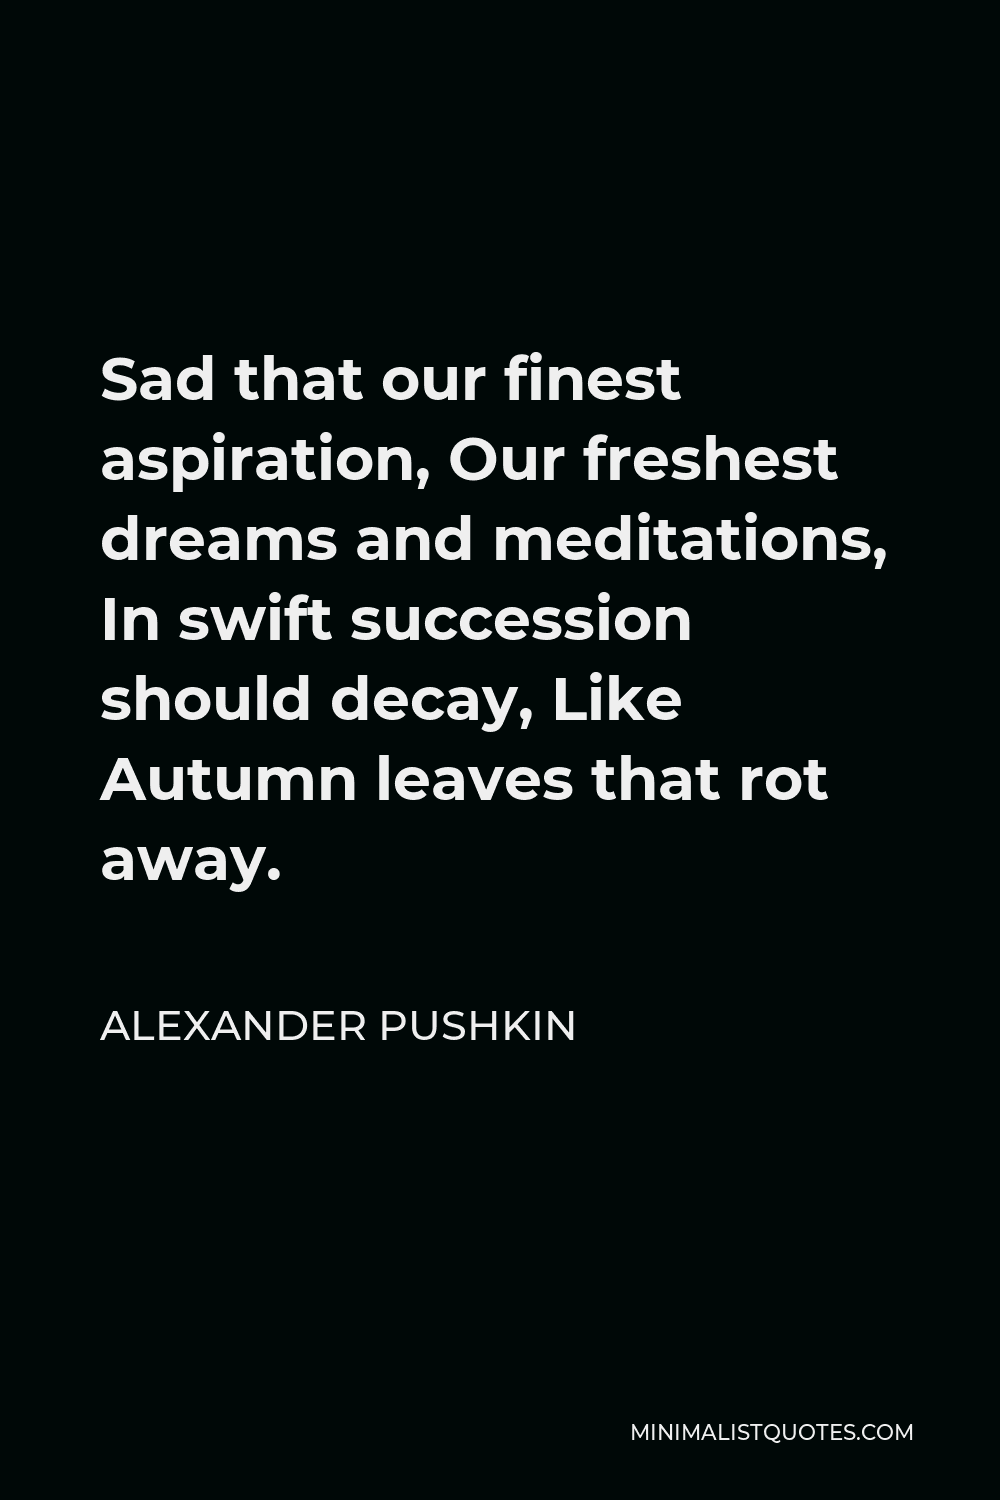 Alexander Pushkin Quote - Sad that our finest aspiration, Our freshest dreams and meditations, In swift succession should decay, Like Autumn leaves that rot away.